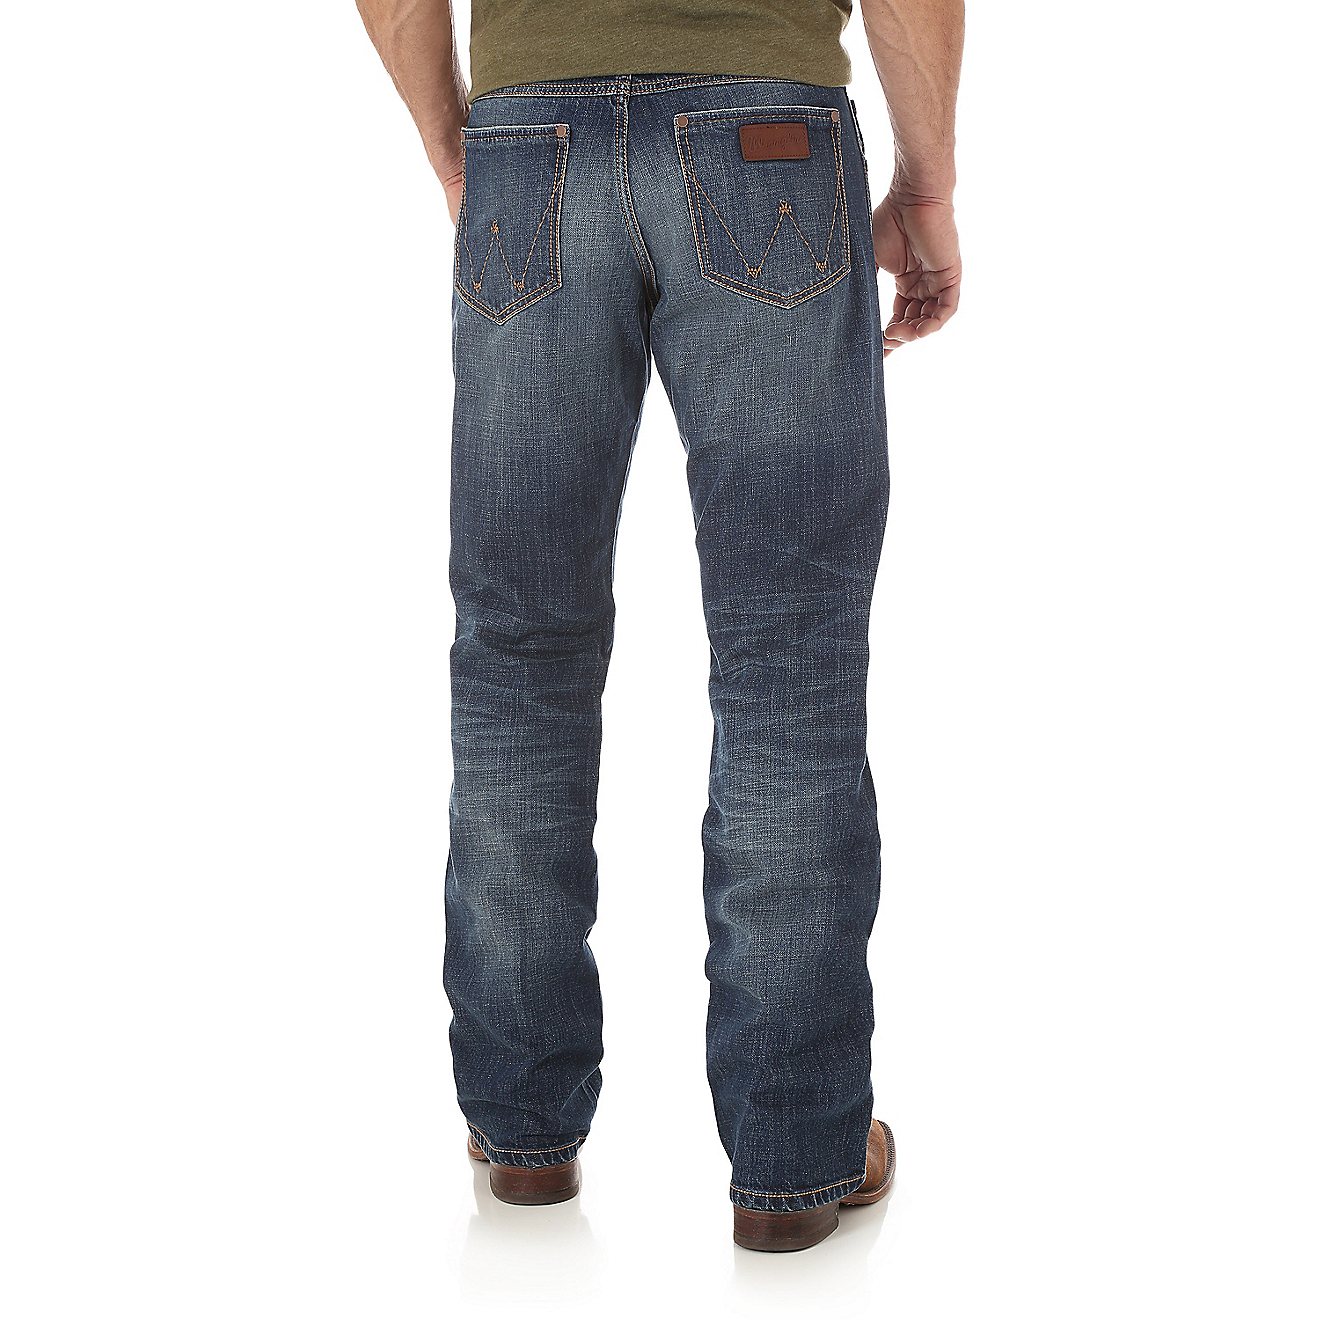 Men/'s WRANGLER concours 01 20X 01 mwxdb Relaxed Fit Jeans 59 $40X32 boot cut